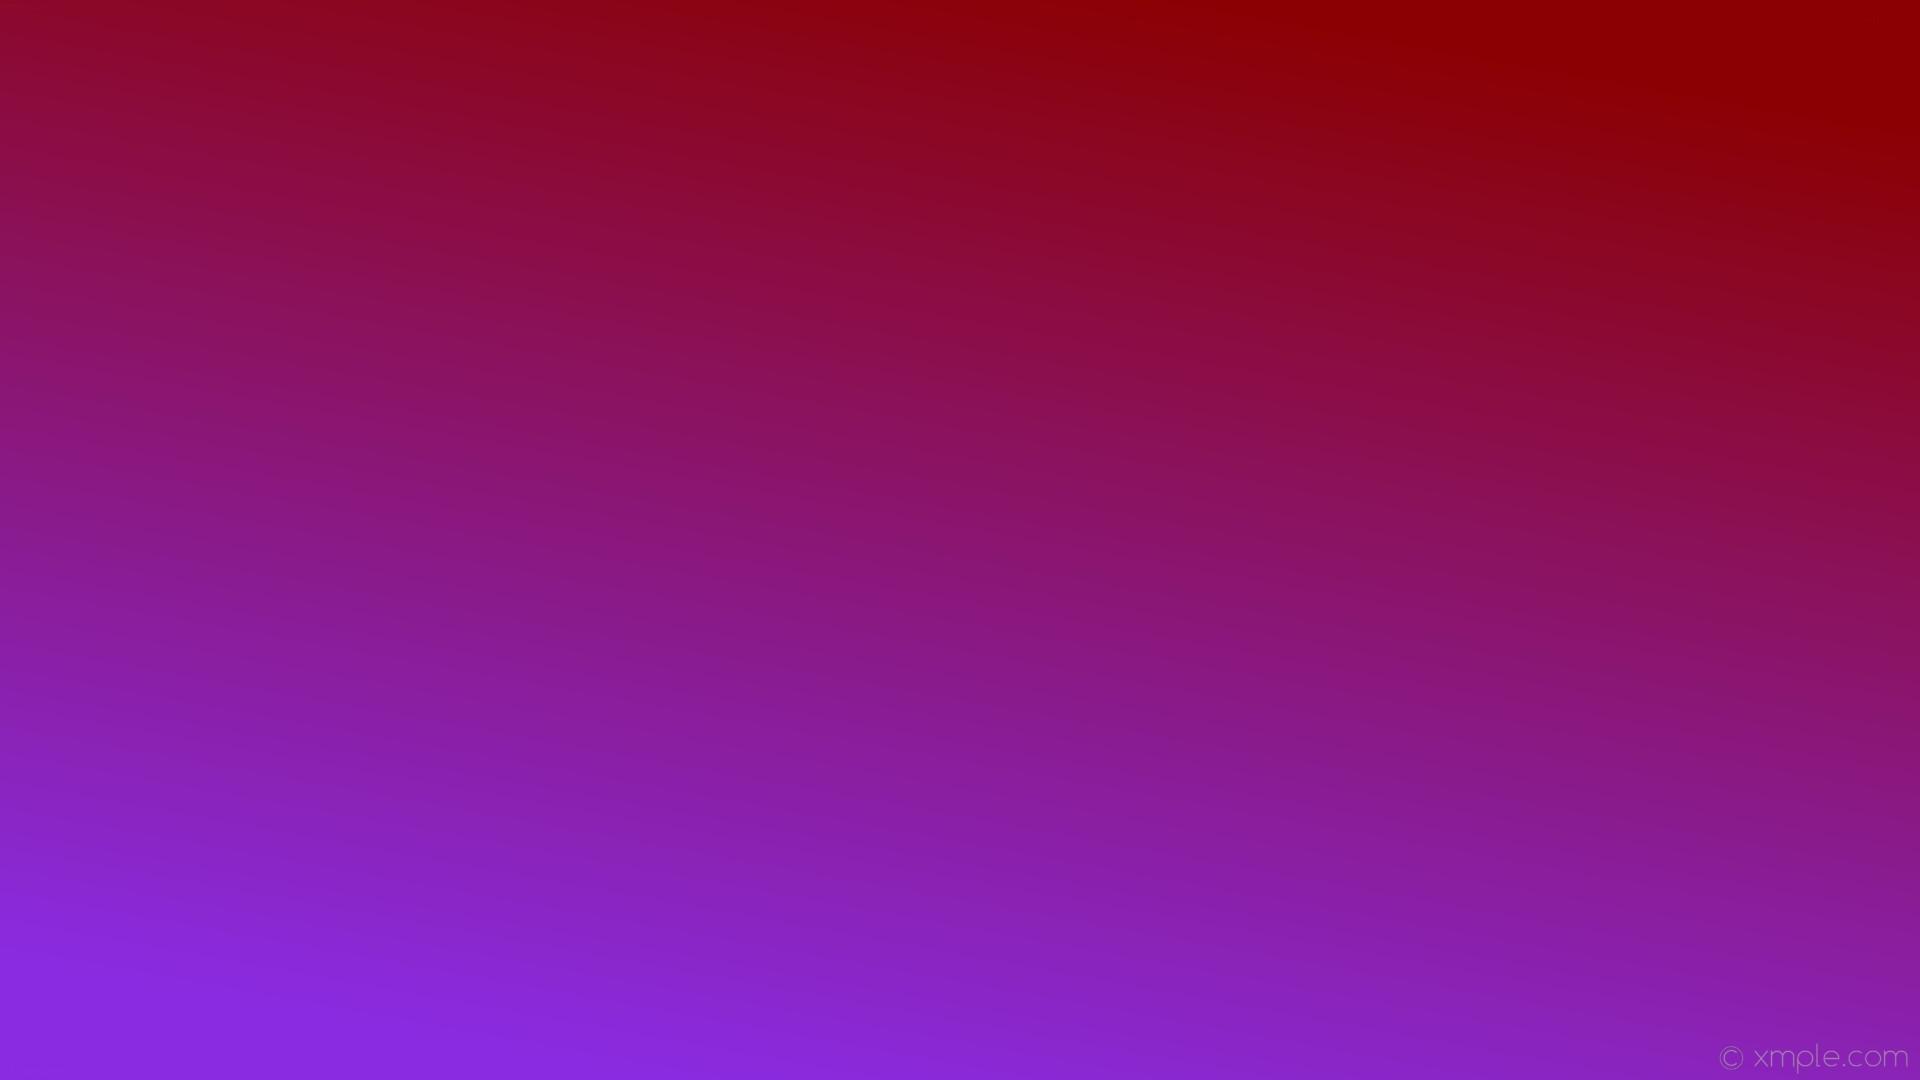 Purple and Red Wallpaper